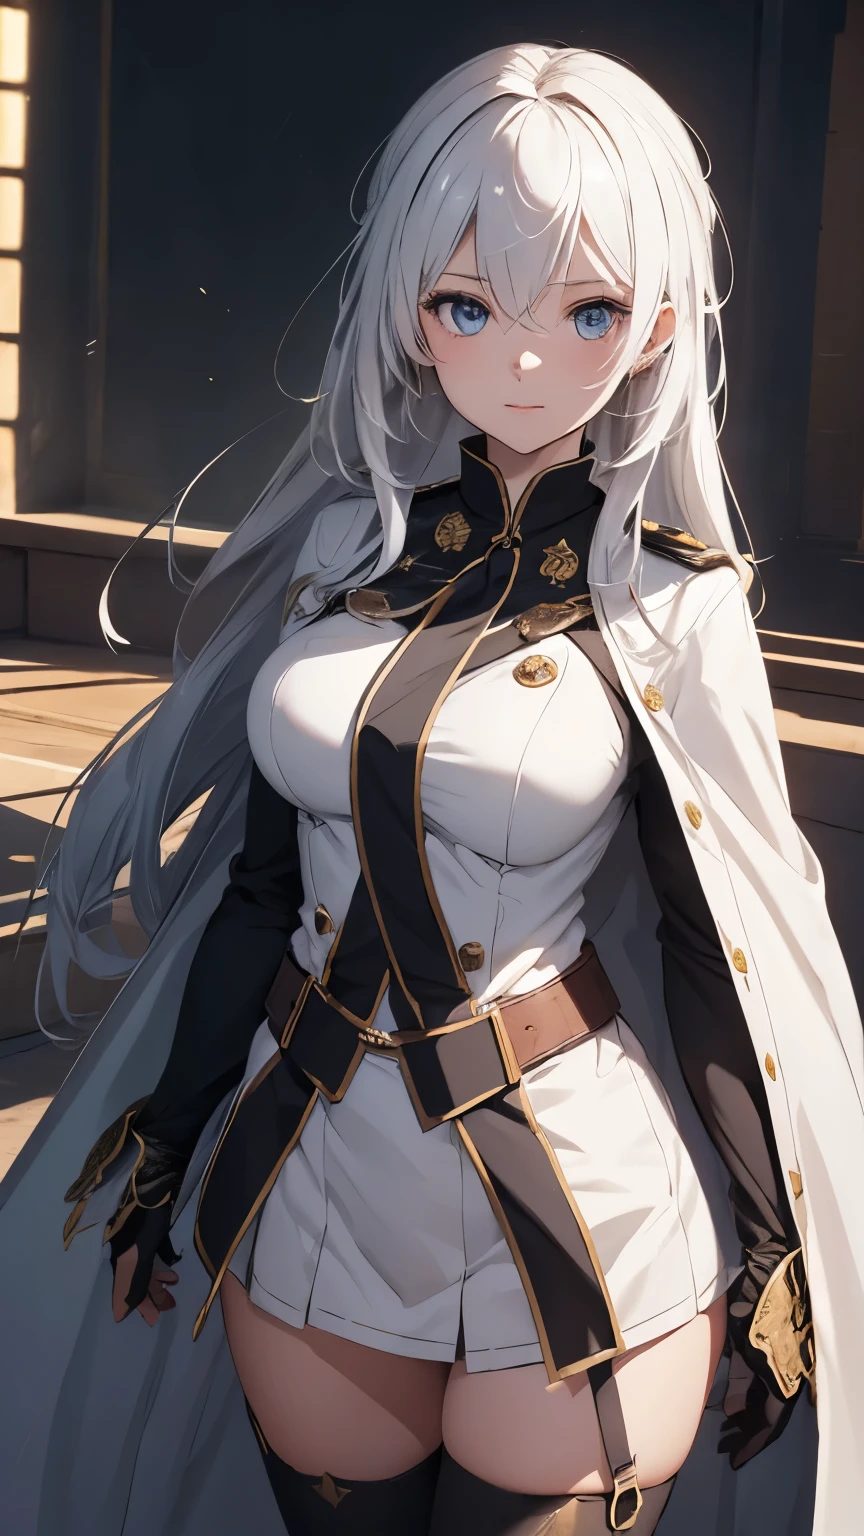 (extremely detailed CG unity 8k wallpaper), (masterpiece), (best quality), (ultra-detailed), (best illustration), (best shadow), (absurdres), 2b, 1girl, long hair, normal size , white hair, Intimidating women, admiral uniform, night, hero pose, white clothes, General Uniform, Military Uniform, Sunlight, exposed to sunlight,commander, cape, fighting, ((beautiful fantasy girl)), (Master Part: 1.2), Best Quality, High Resolution, photorealestic, photogenic, Unity 8k Wallpaper, perfect lighting, (perfect arms, perfect anatomy) beatiful face, intricate details, lifelike details, the anime, The Perfect Girl, perfect details, ultra HD |, 8k, Professional photo(extremely detailed CG unity 8k wallpaper), (masterpiece), (best quality), (ultra-detailed), (best illustration), (best shadow), (absurdres), 2b, 1girl, long hair, normal size , white hair, admiral uniform, night, hero pose, white clothes, General Uniform, Military Uniform, Sunlight, exposed to sunlight, commander, black clothes, happy expression